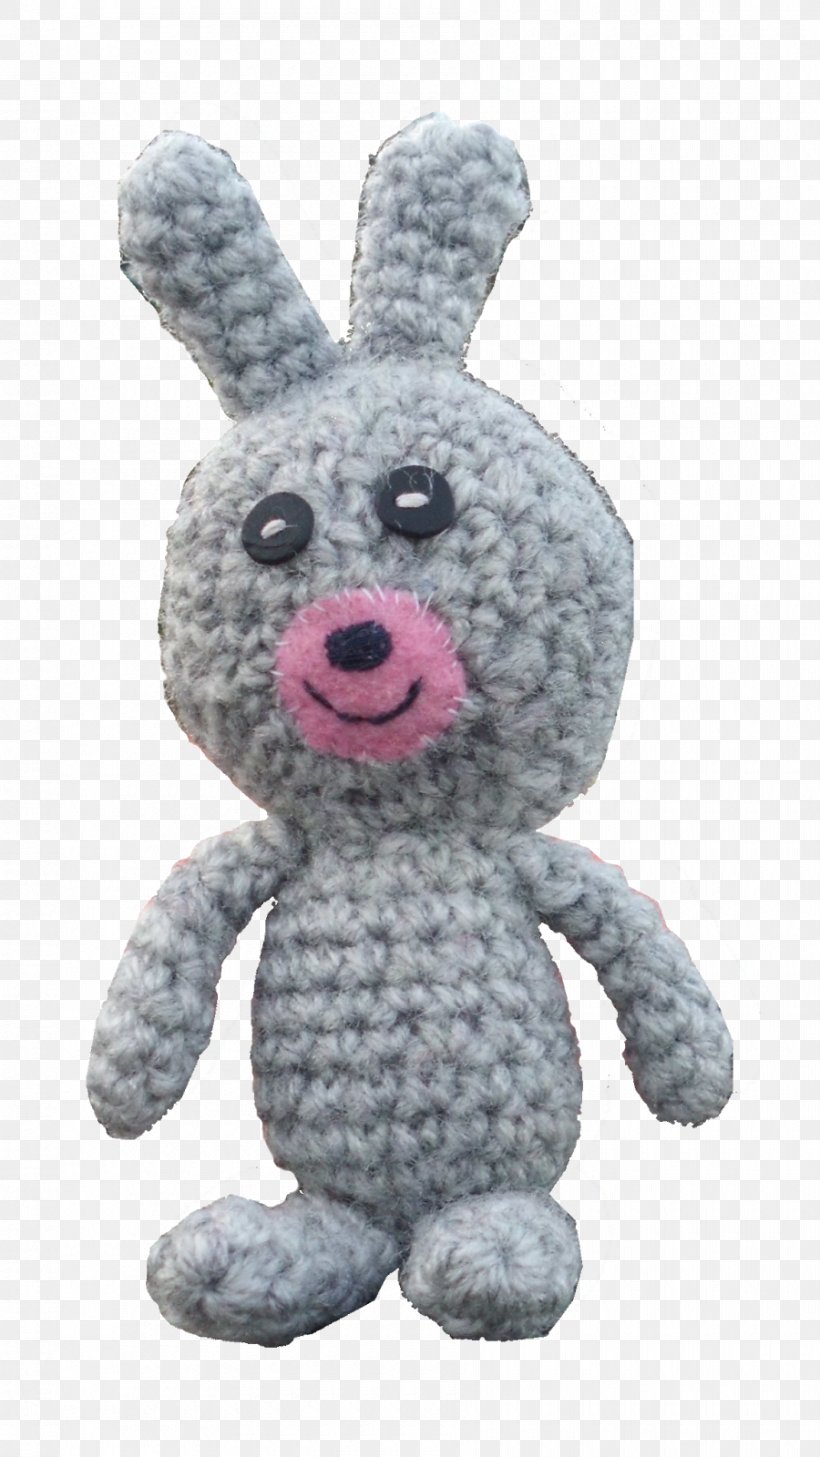 Easter Bunny Rabbit Stuffed Animals & Cuddly Toys, PNG, 900x1600px, Easter Bunny, Easter, Plush, Rabbit, Rabits And Hares Download Free